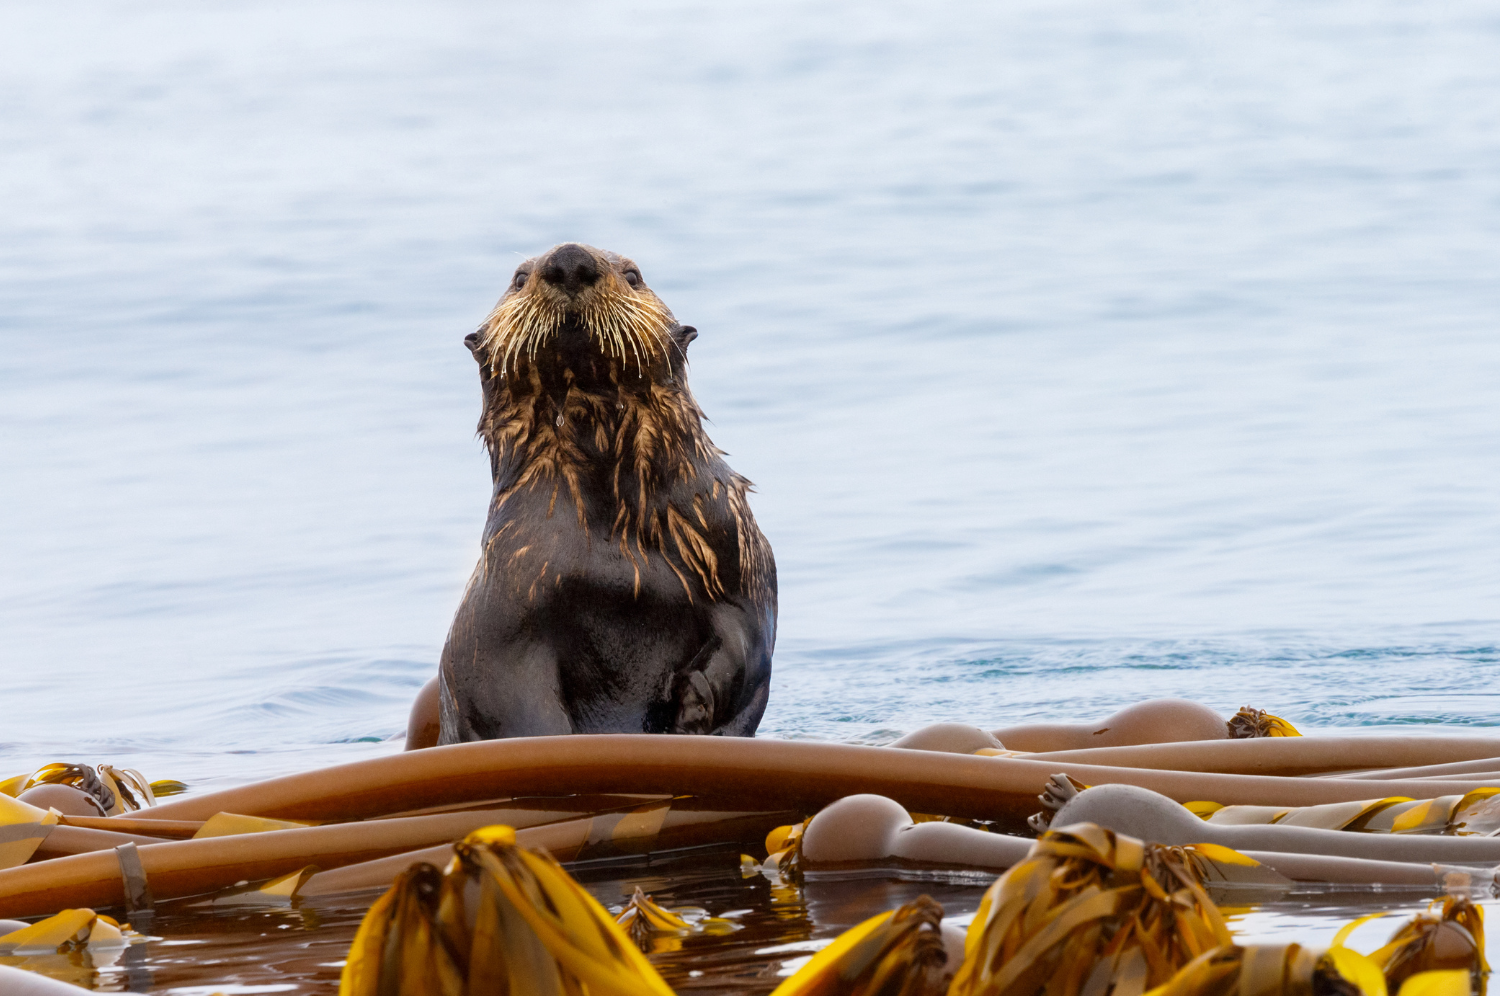 Image of a sea otter playing in some floating kelp.